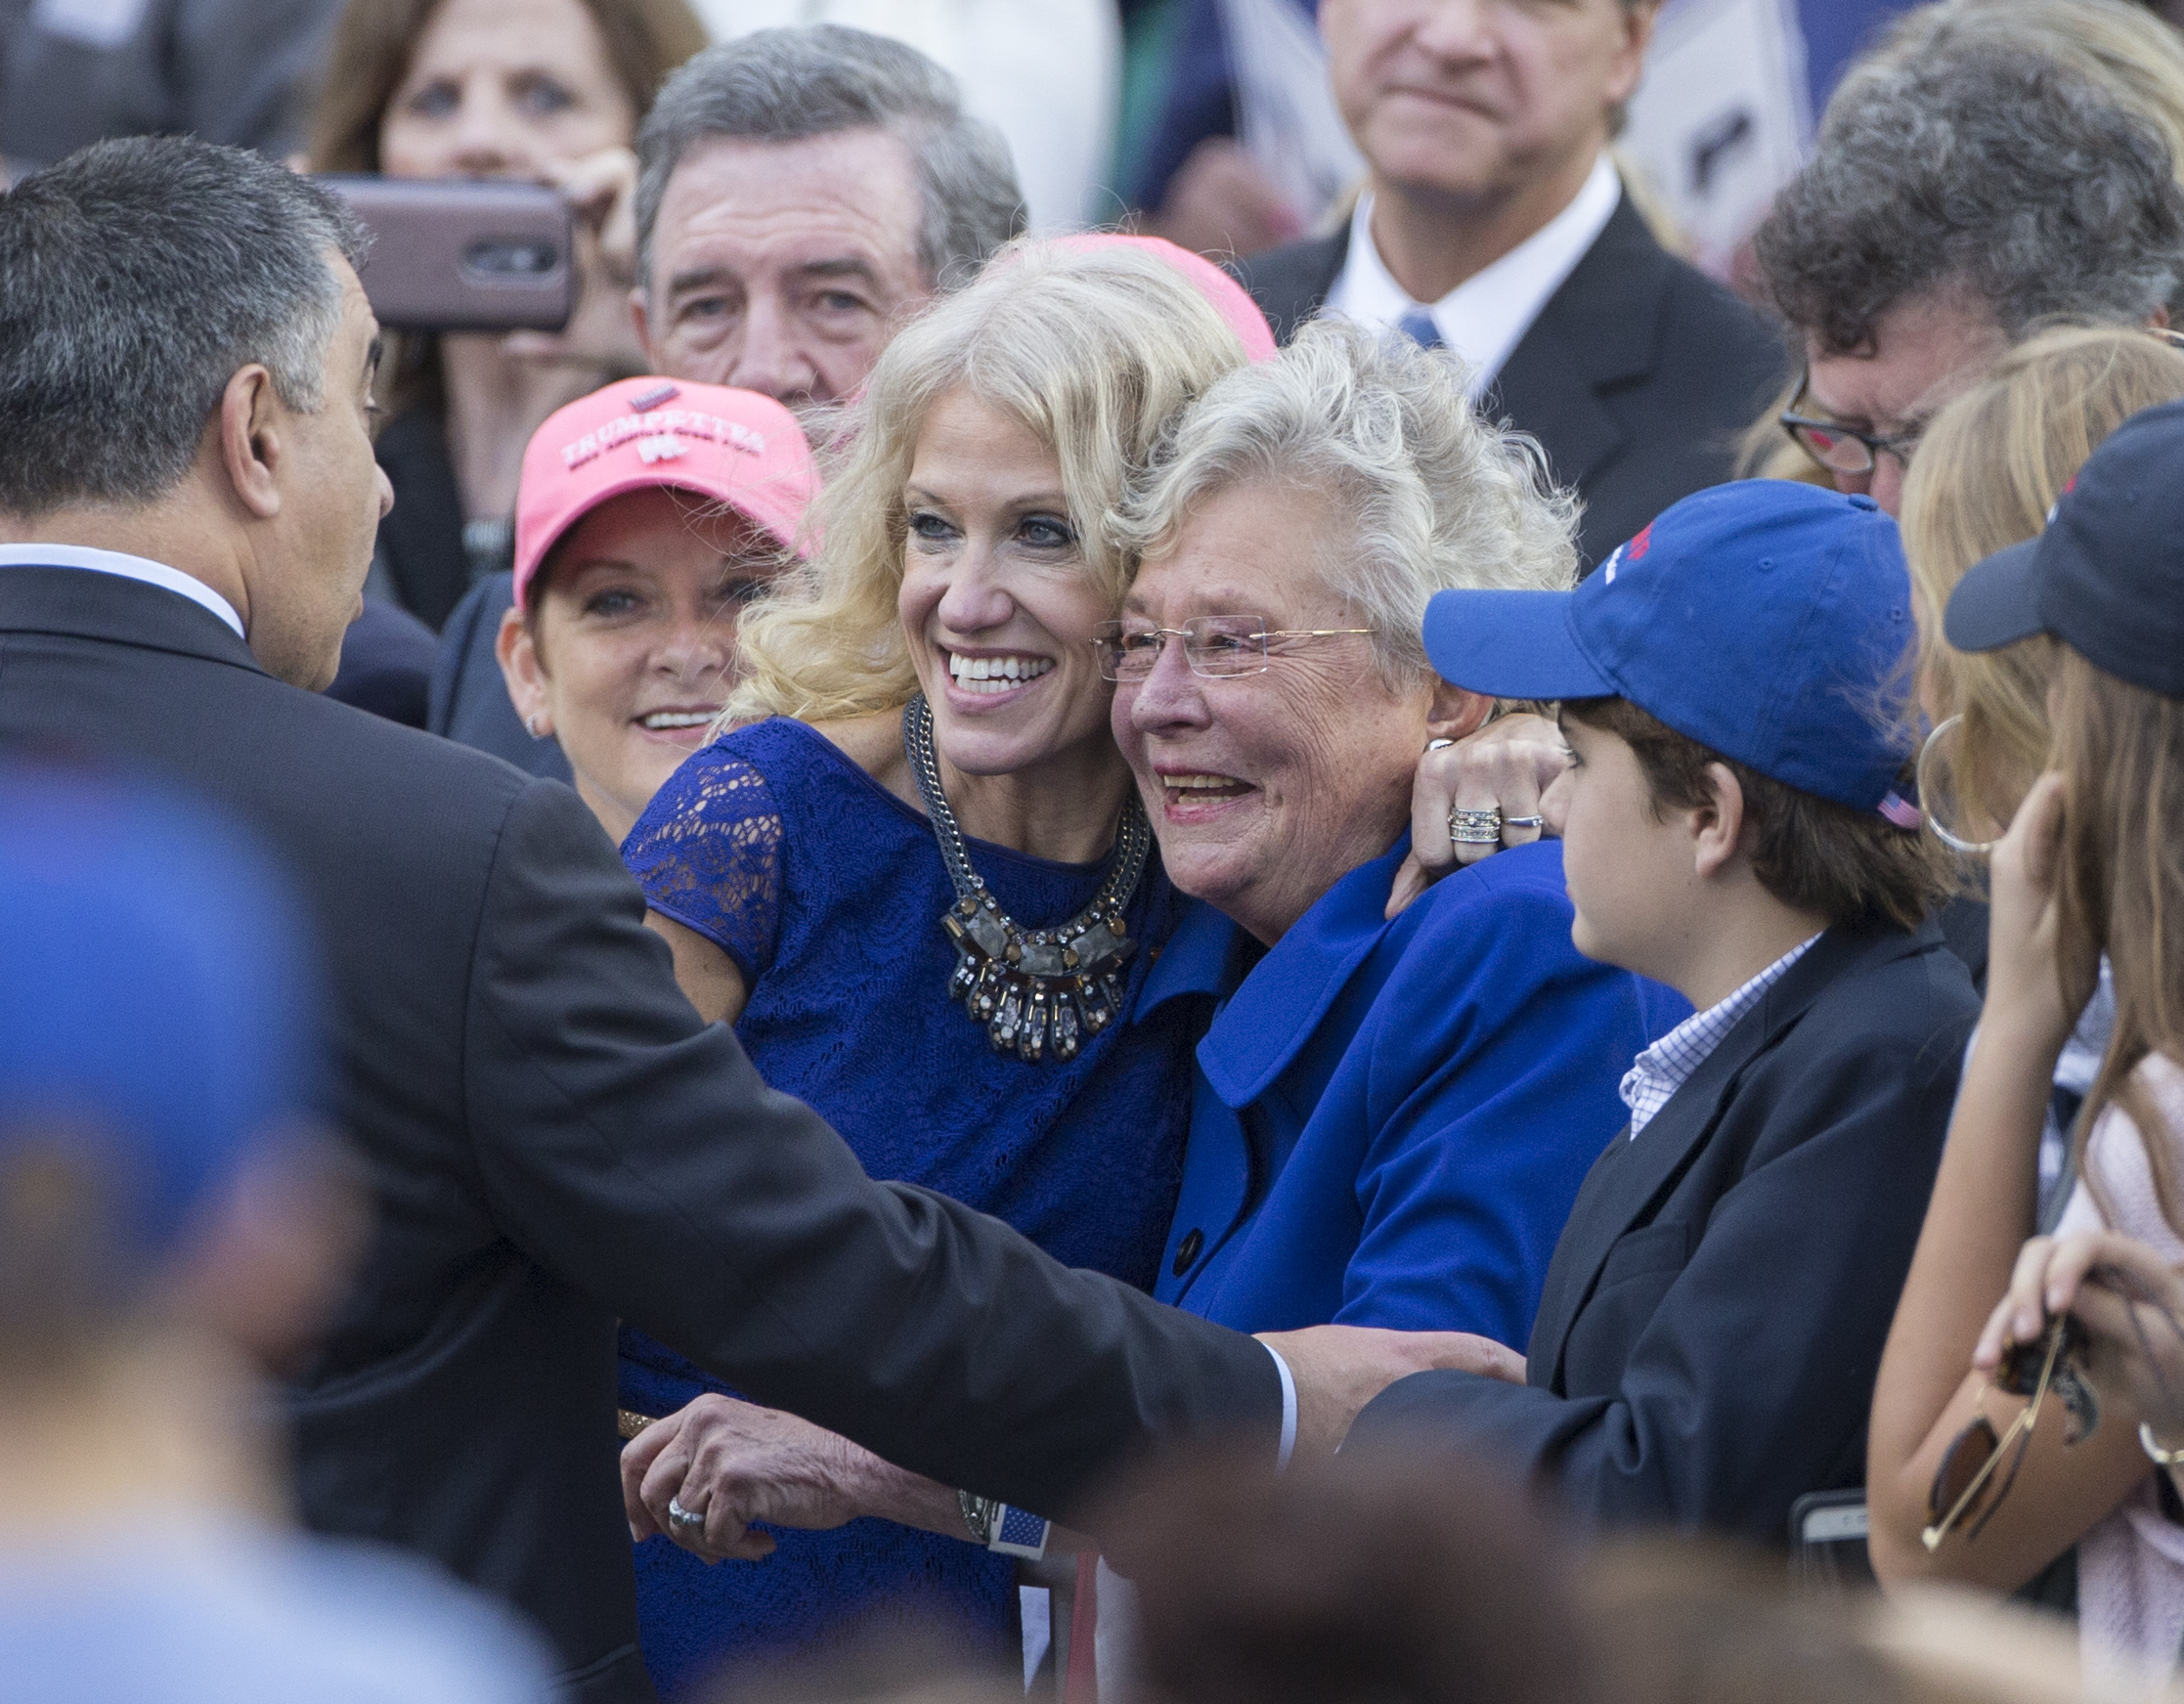 President-elect Donald Trump's campaign manager Kellyanne Conway, left, poses for photos with Alabama Lieutenant Governor Kay Ivey during a thank you rally in Ladd-Peebles Stadium on December 17, 2016 in Mobile, Alabama. (Photo by Mark Wallheiser/Getty Images)